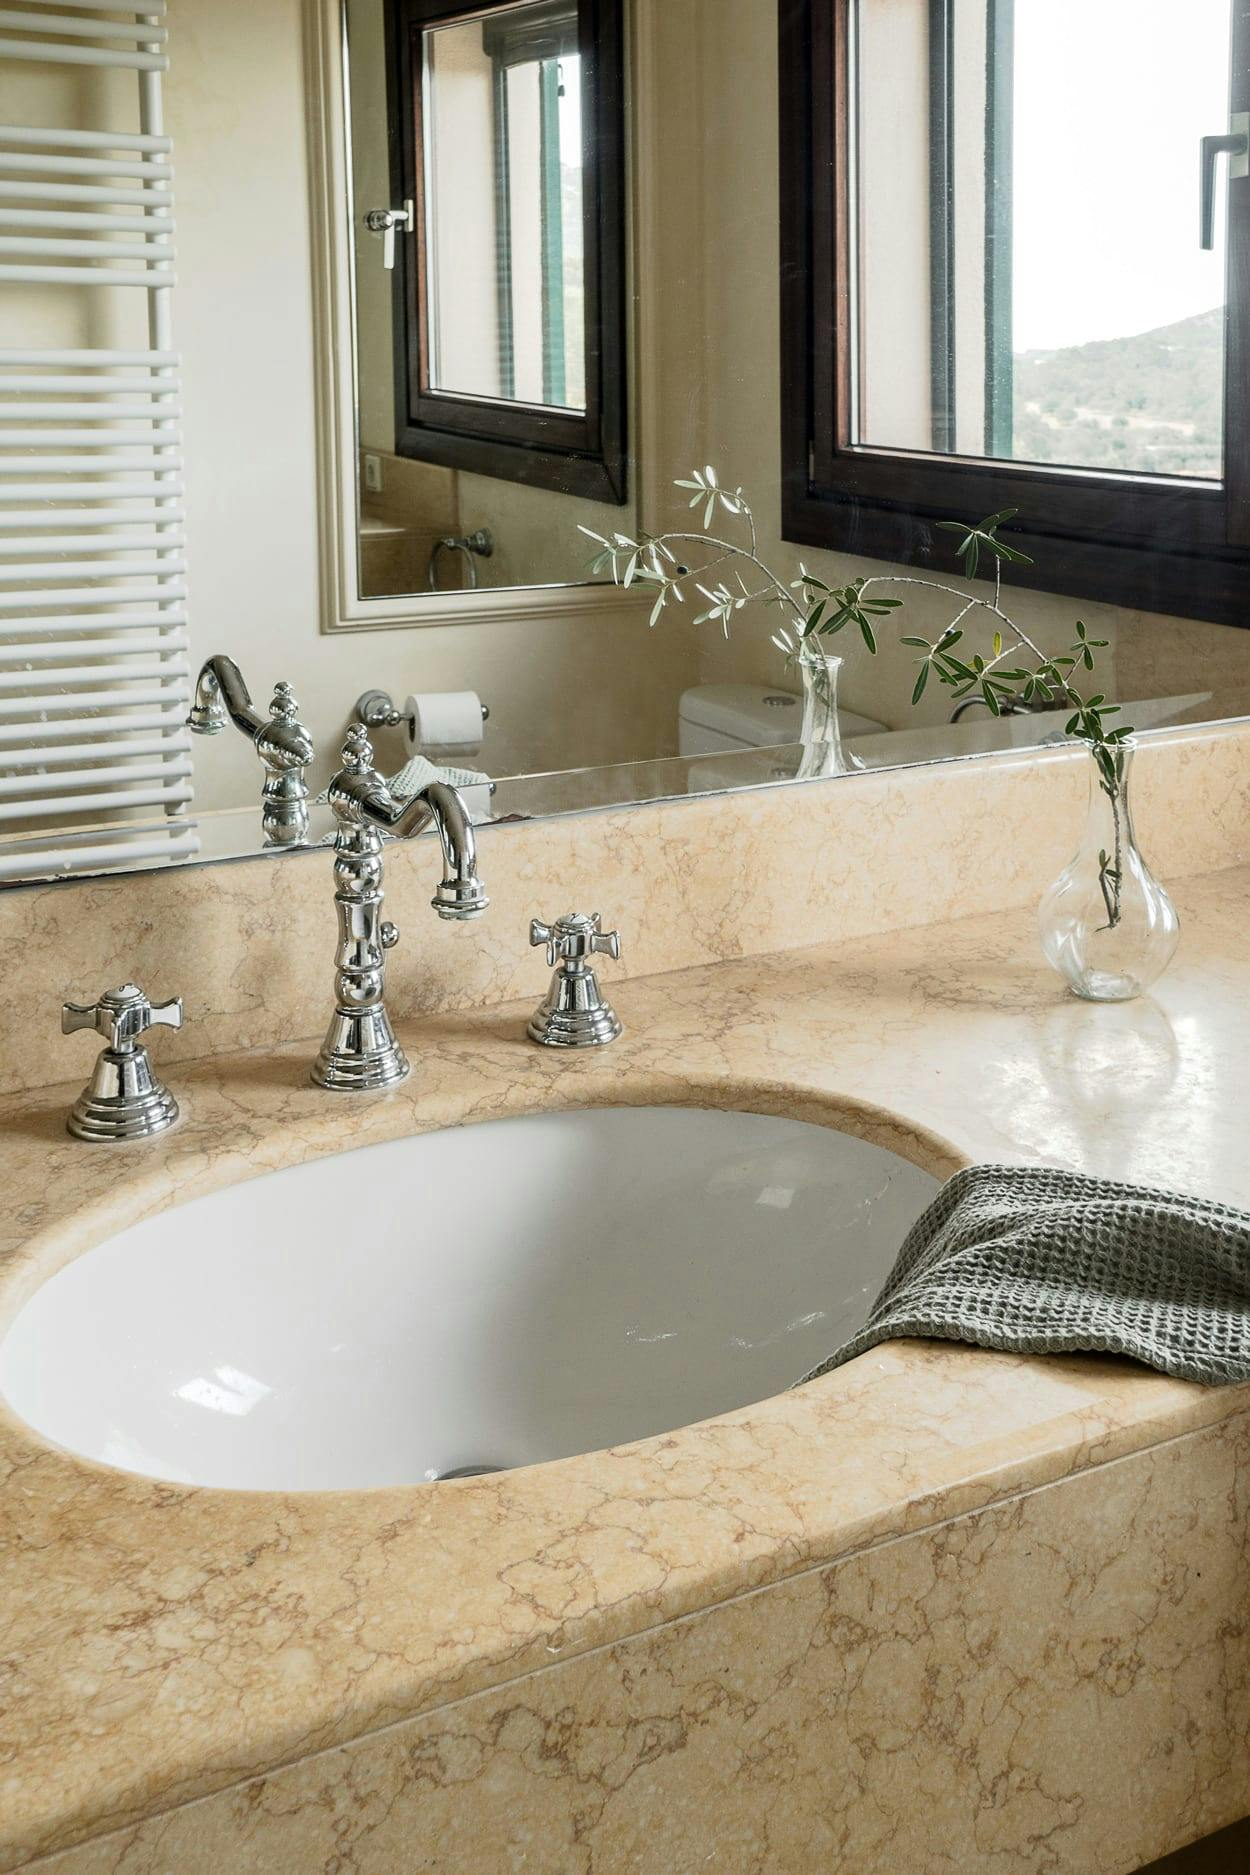 The image features a large, marble bathroom sink with a mirror above it, and a large window in the background.